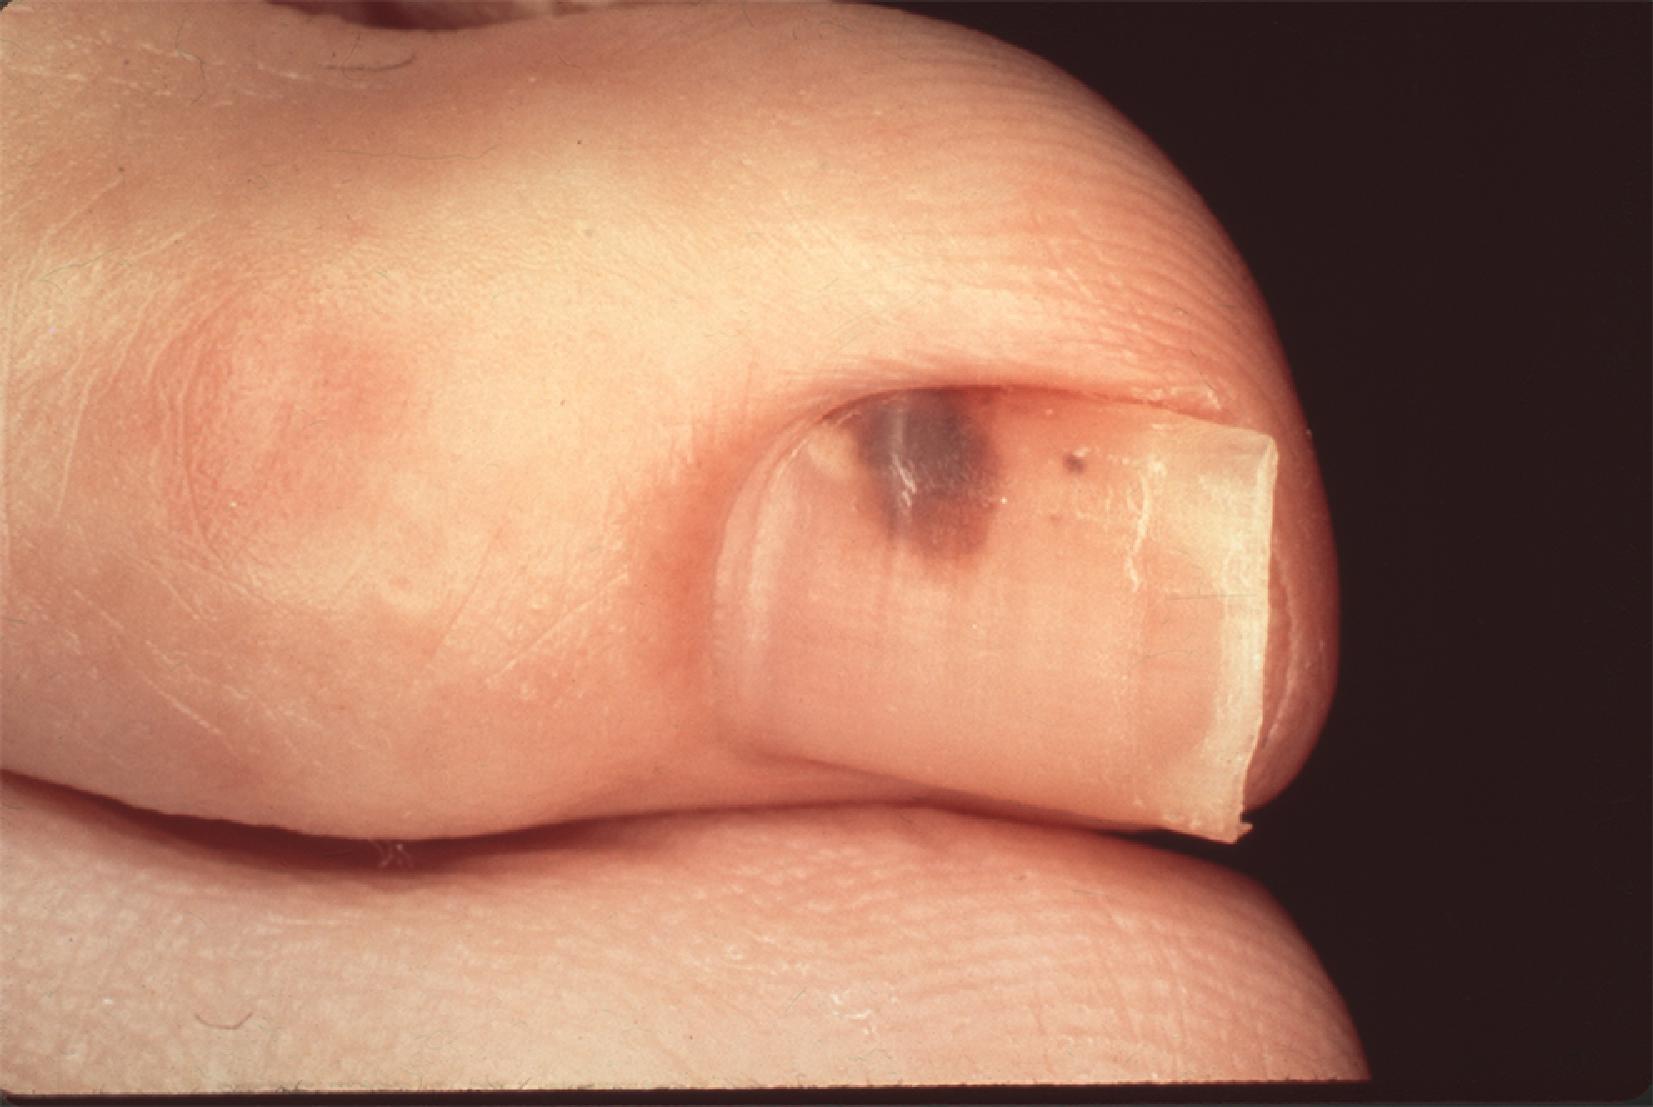 FIG. 7, Nail bed melanoma. This lesion seems to extend beyond the nail bed into the perionychium.